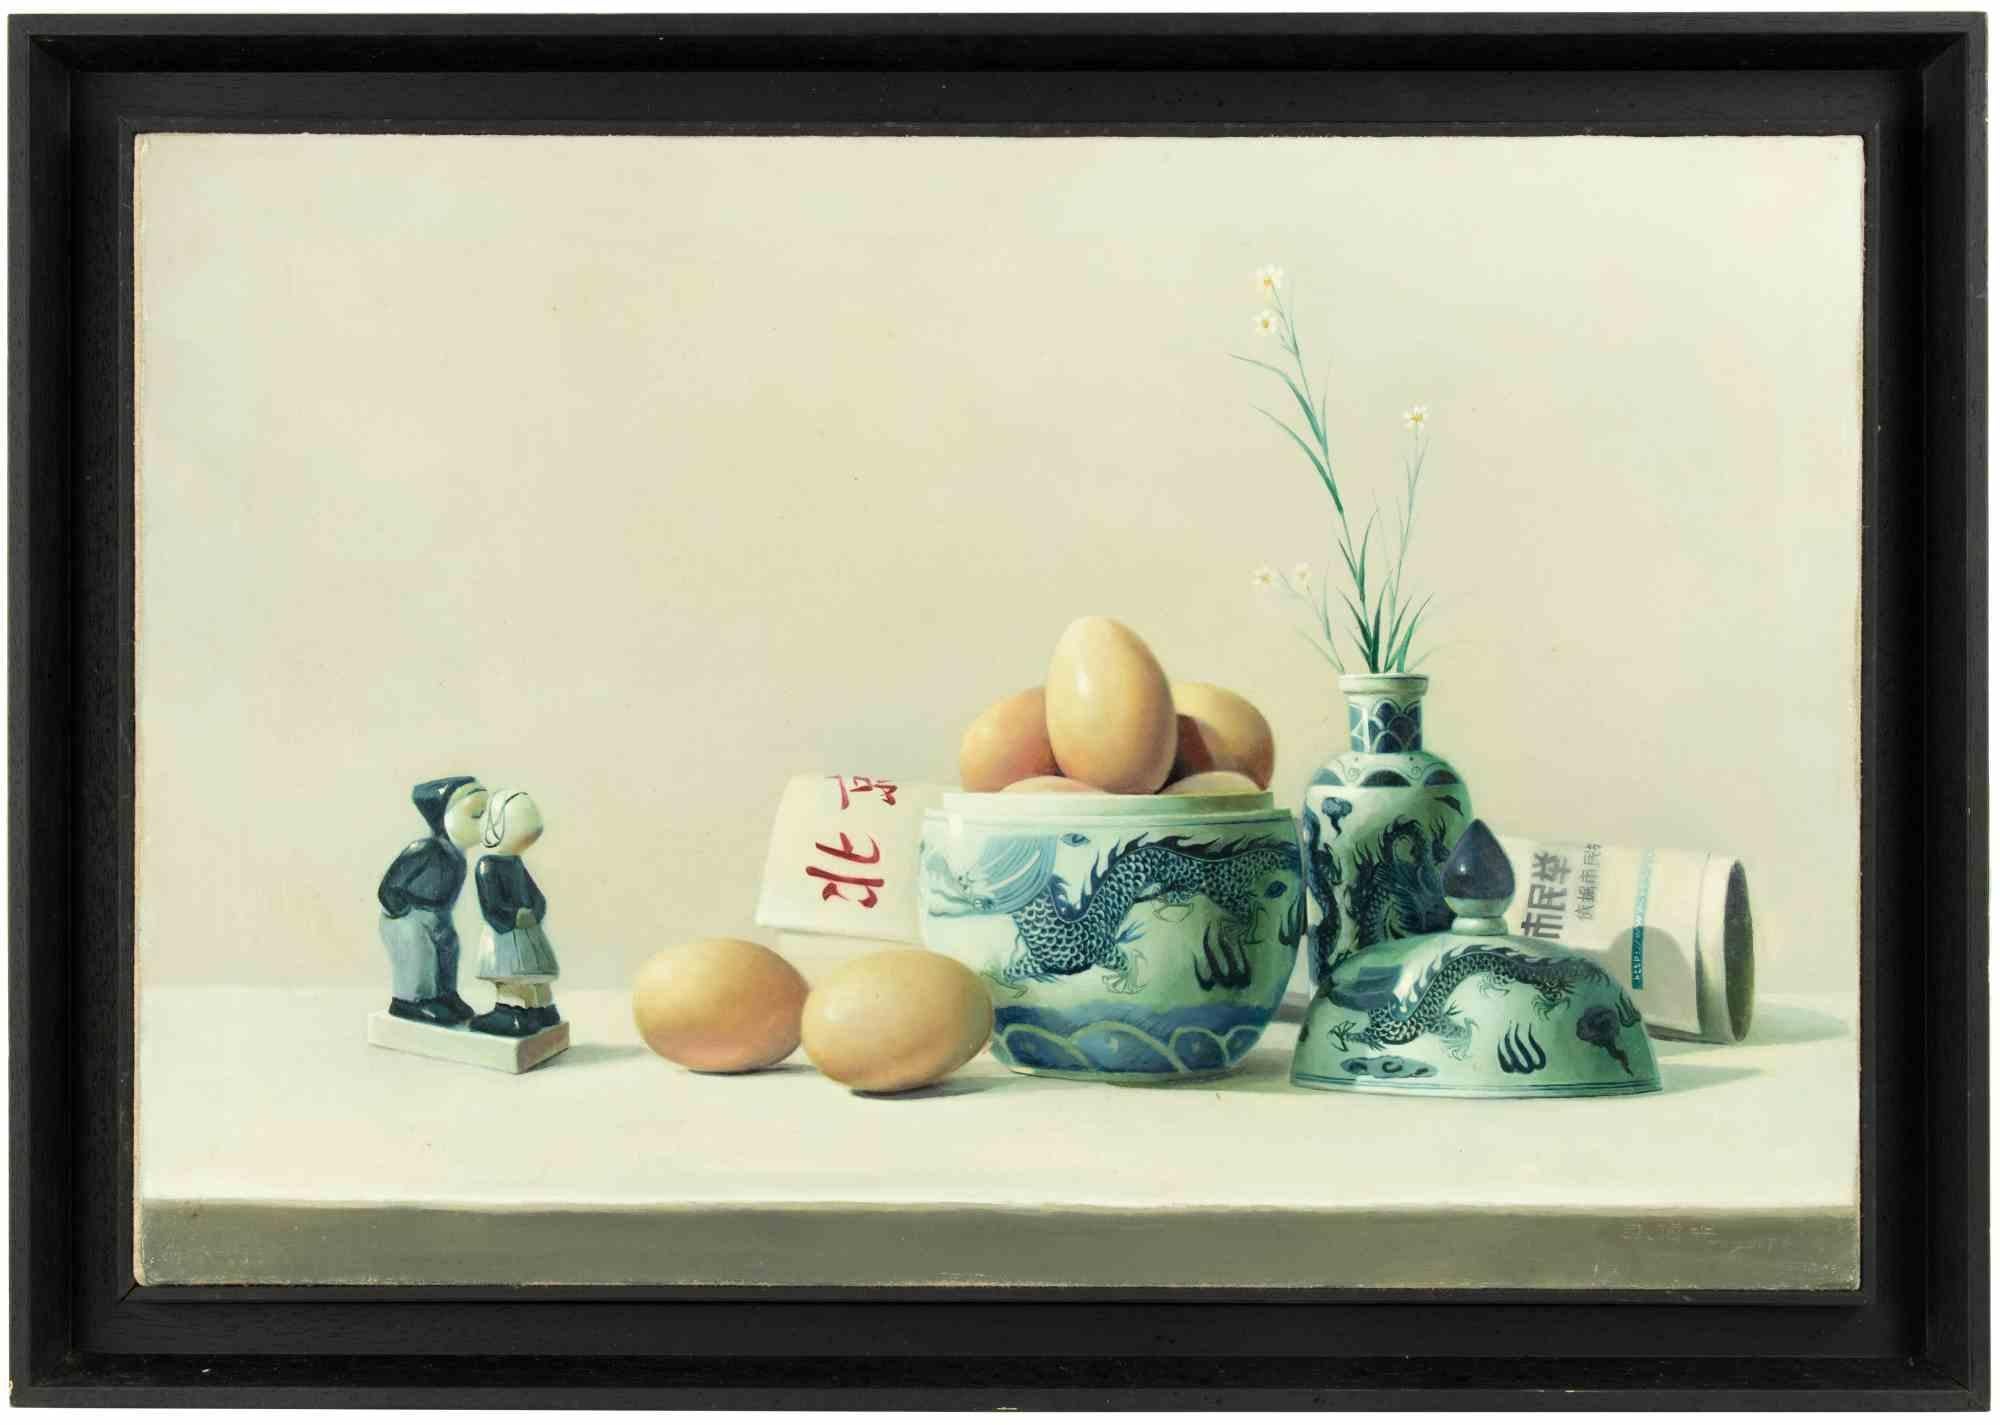 Breakfast -  Oil Painting by Zhang Wei Guang - 2000s